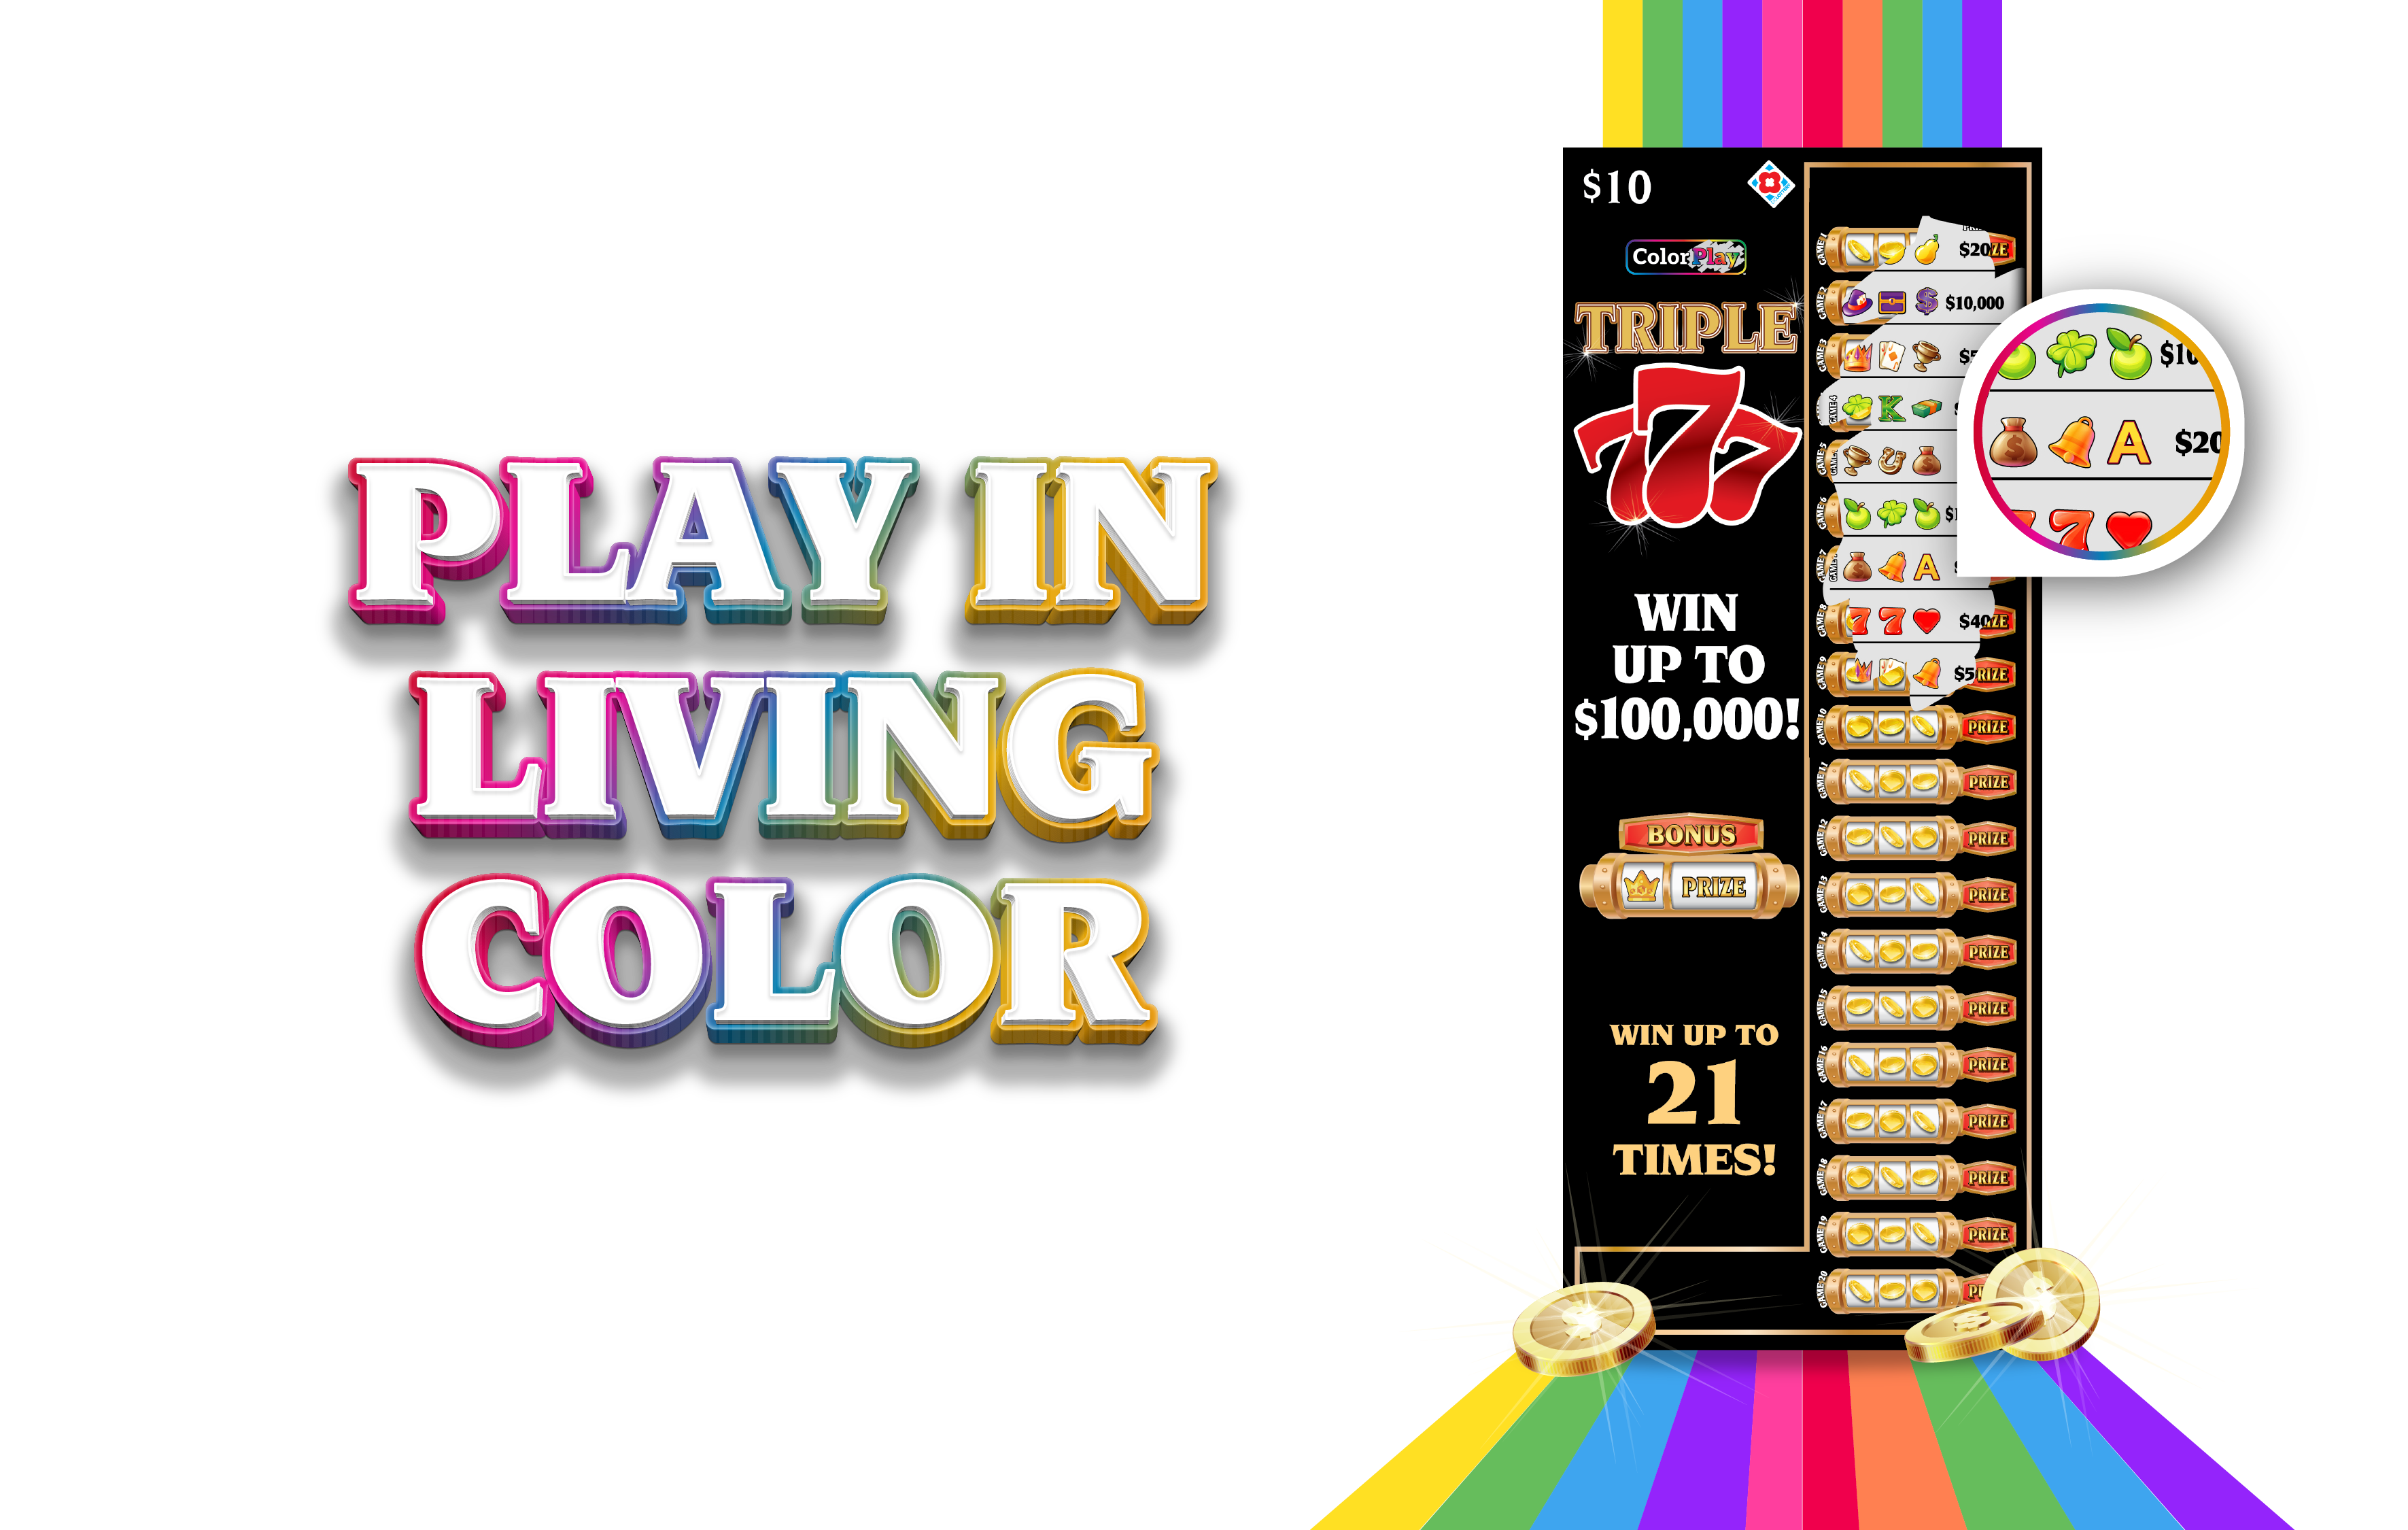 Triple 777 Scratcher, Play in Living Color